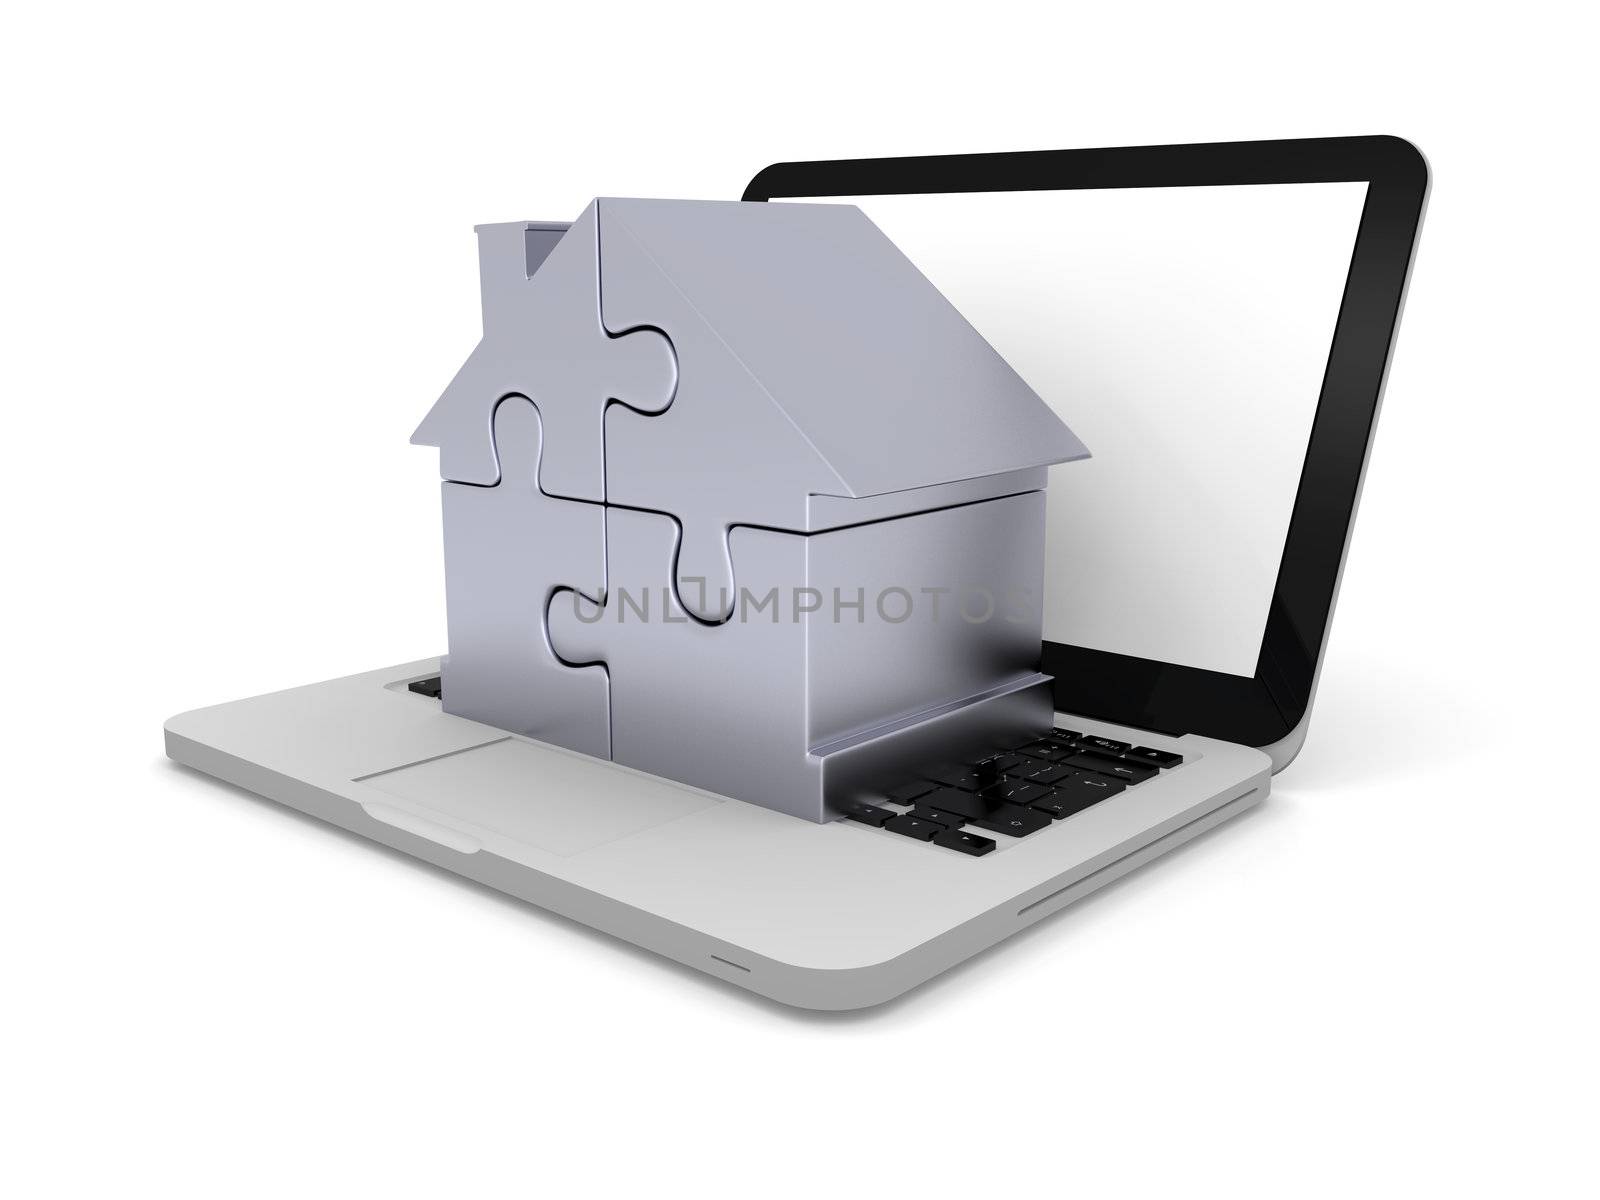 Home jigsaw on laptop by Harvepino